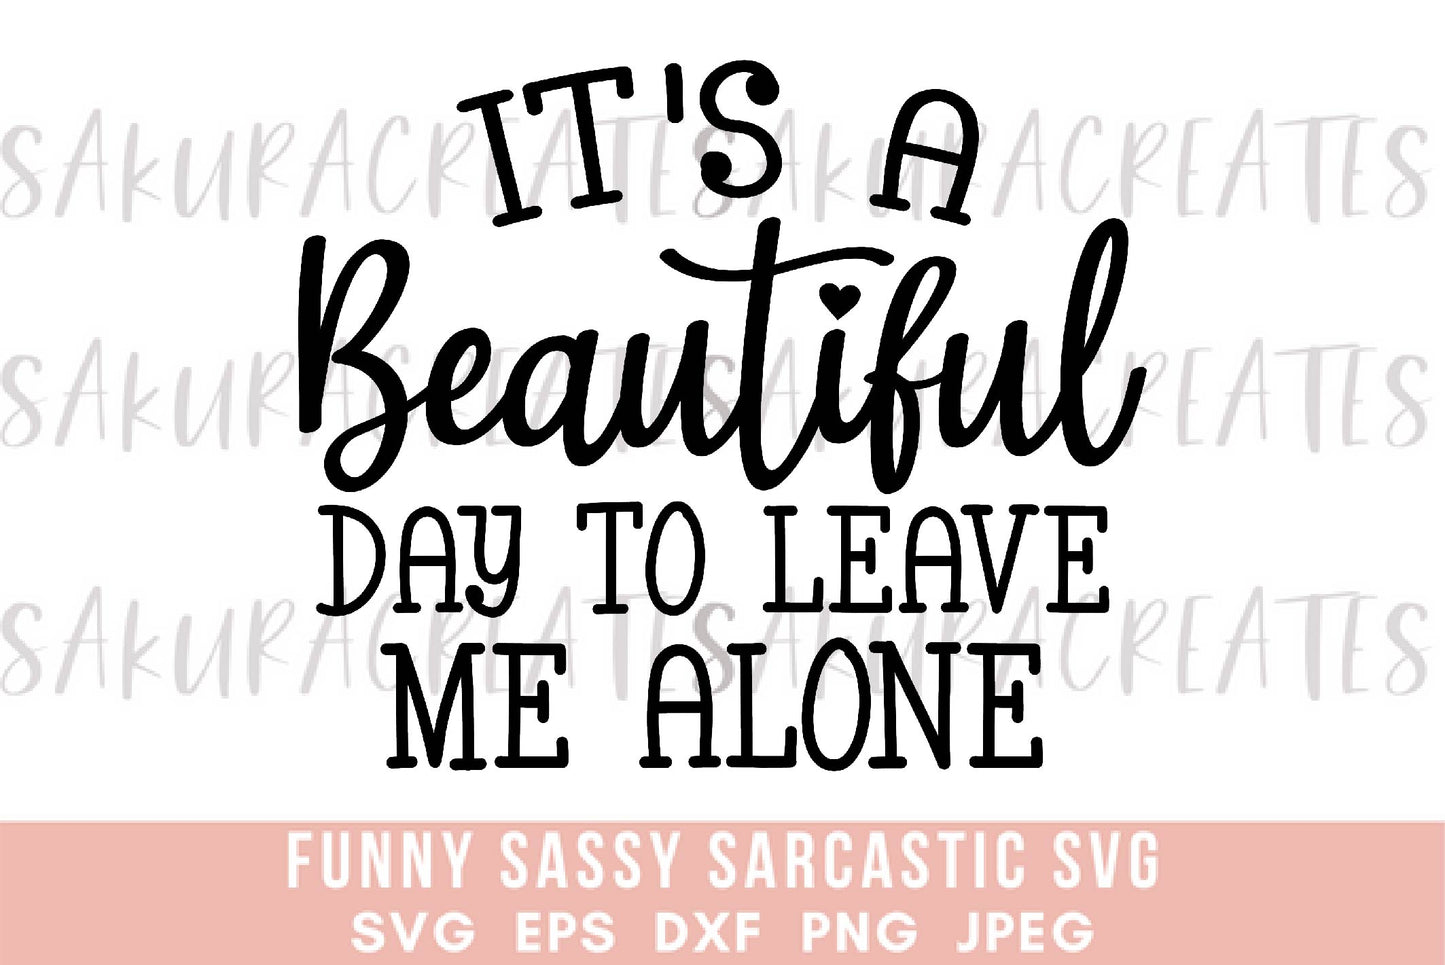 It's a beautiful day to leave me alone SVG DXF EPS PNG JPEG SVG cut file silhouette cricut funny sarcastic sassy quotes sayings